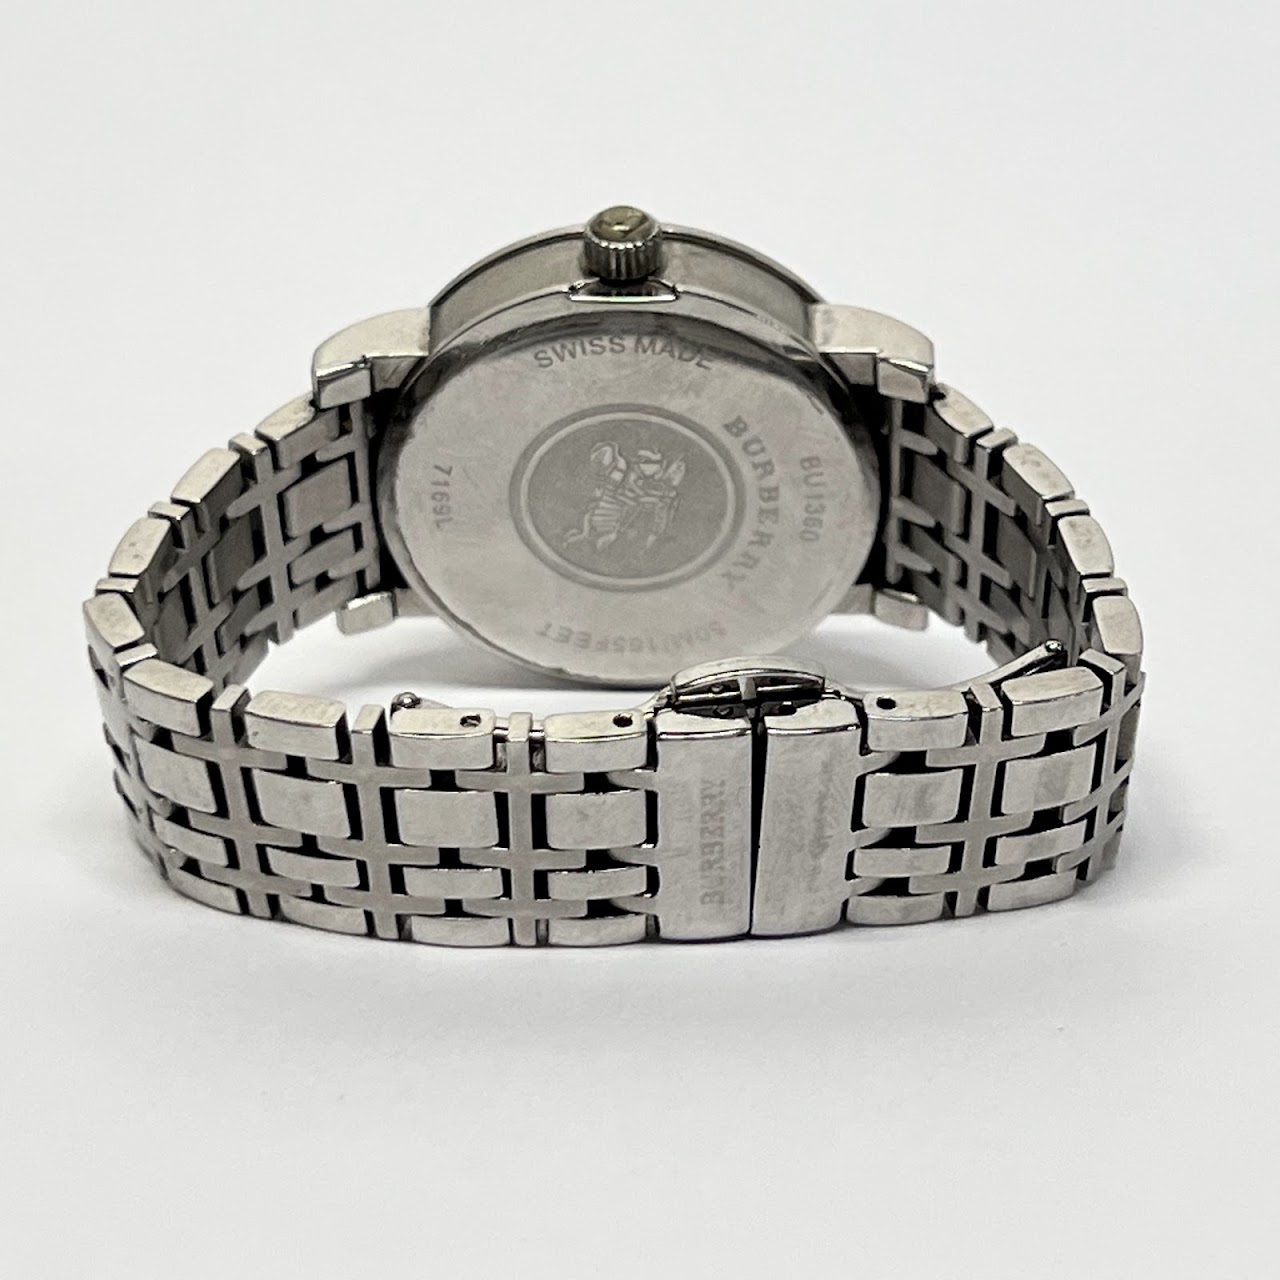 Burberry Check Dial Watch